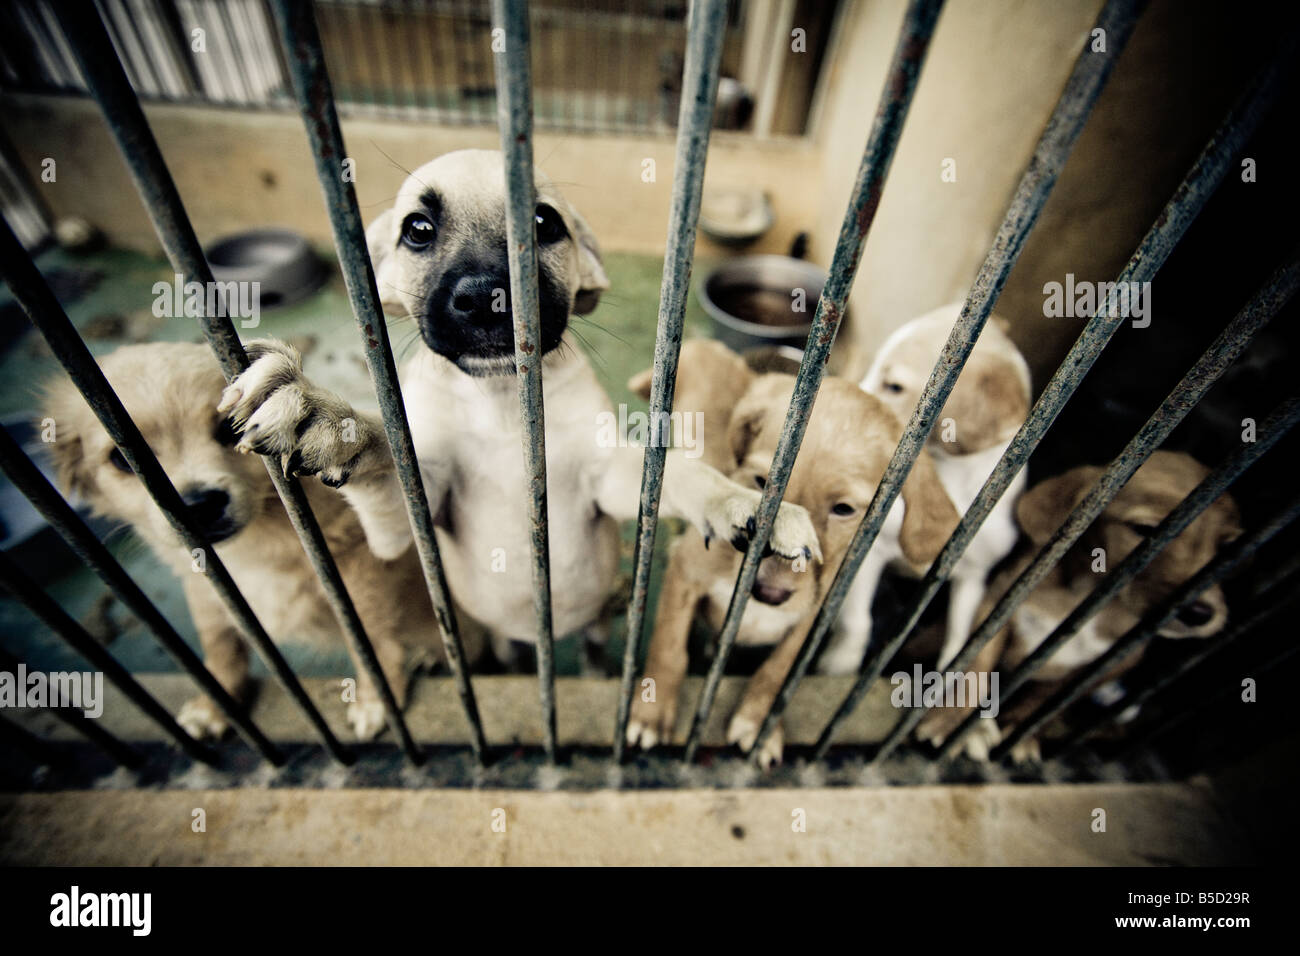 Puppies behind bar at a rescue center for abandoned dogs. Stock Photo